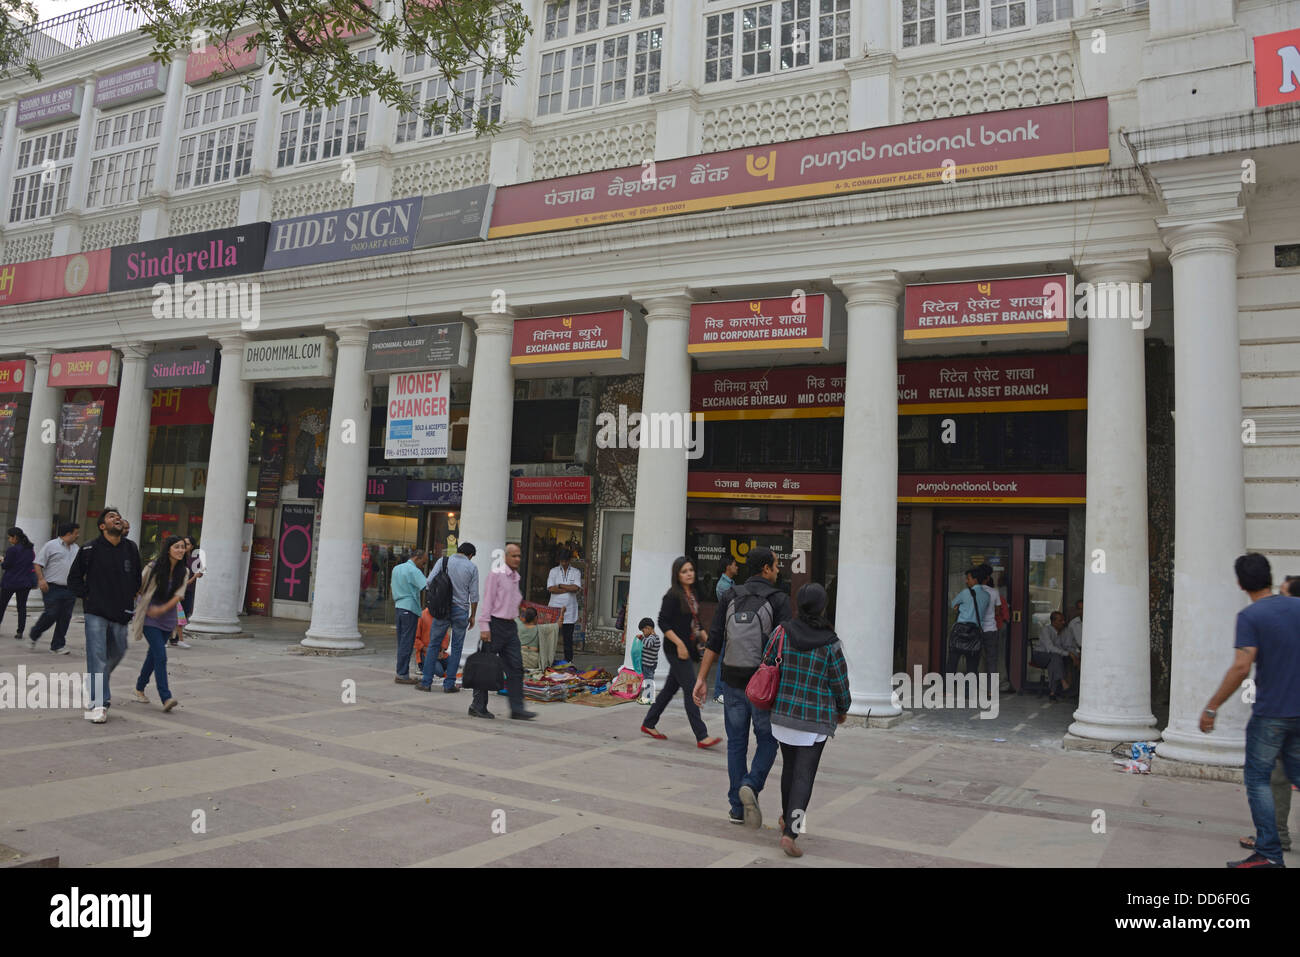 Connaught Place, shopping complex in New Delhi, India was built by the